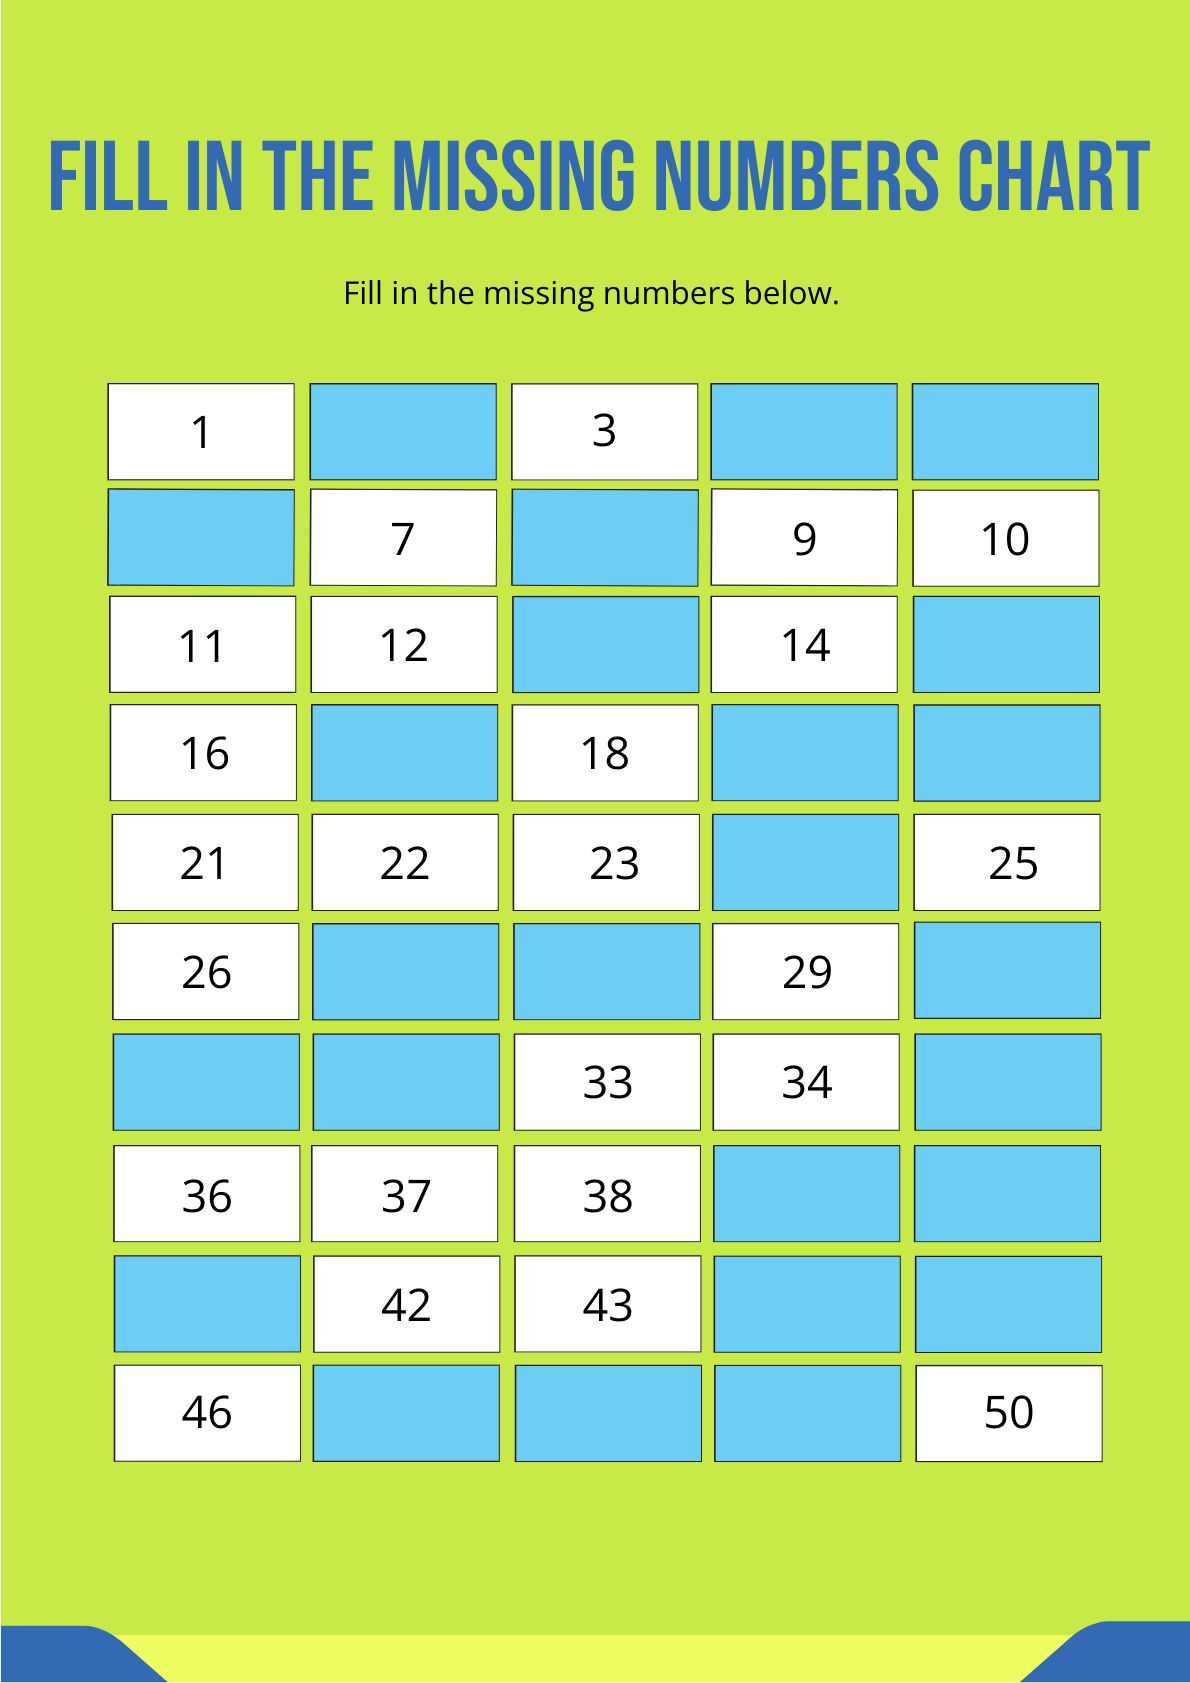 Fill In The Missing Numbers Chart in PDF, Illustrator